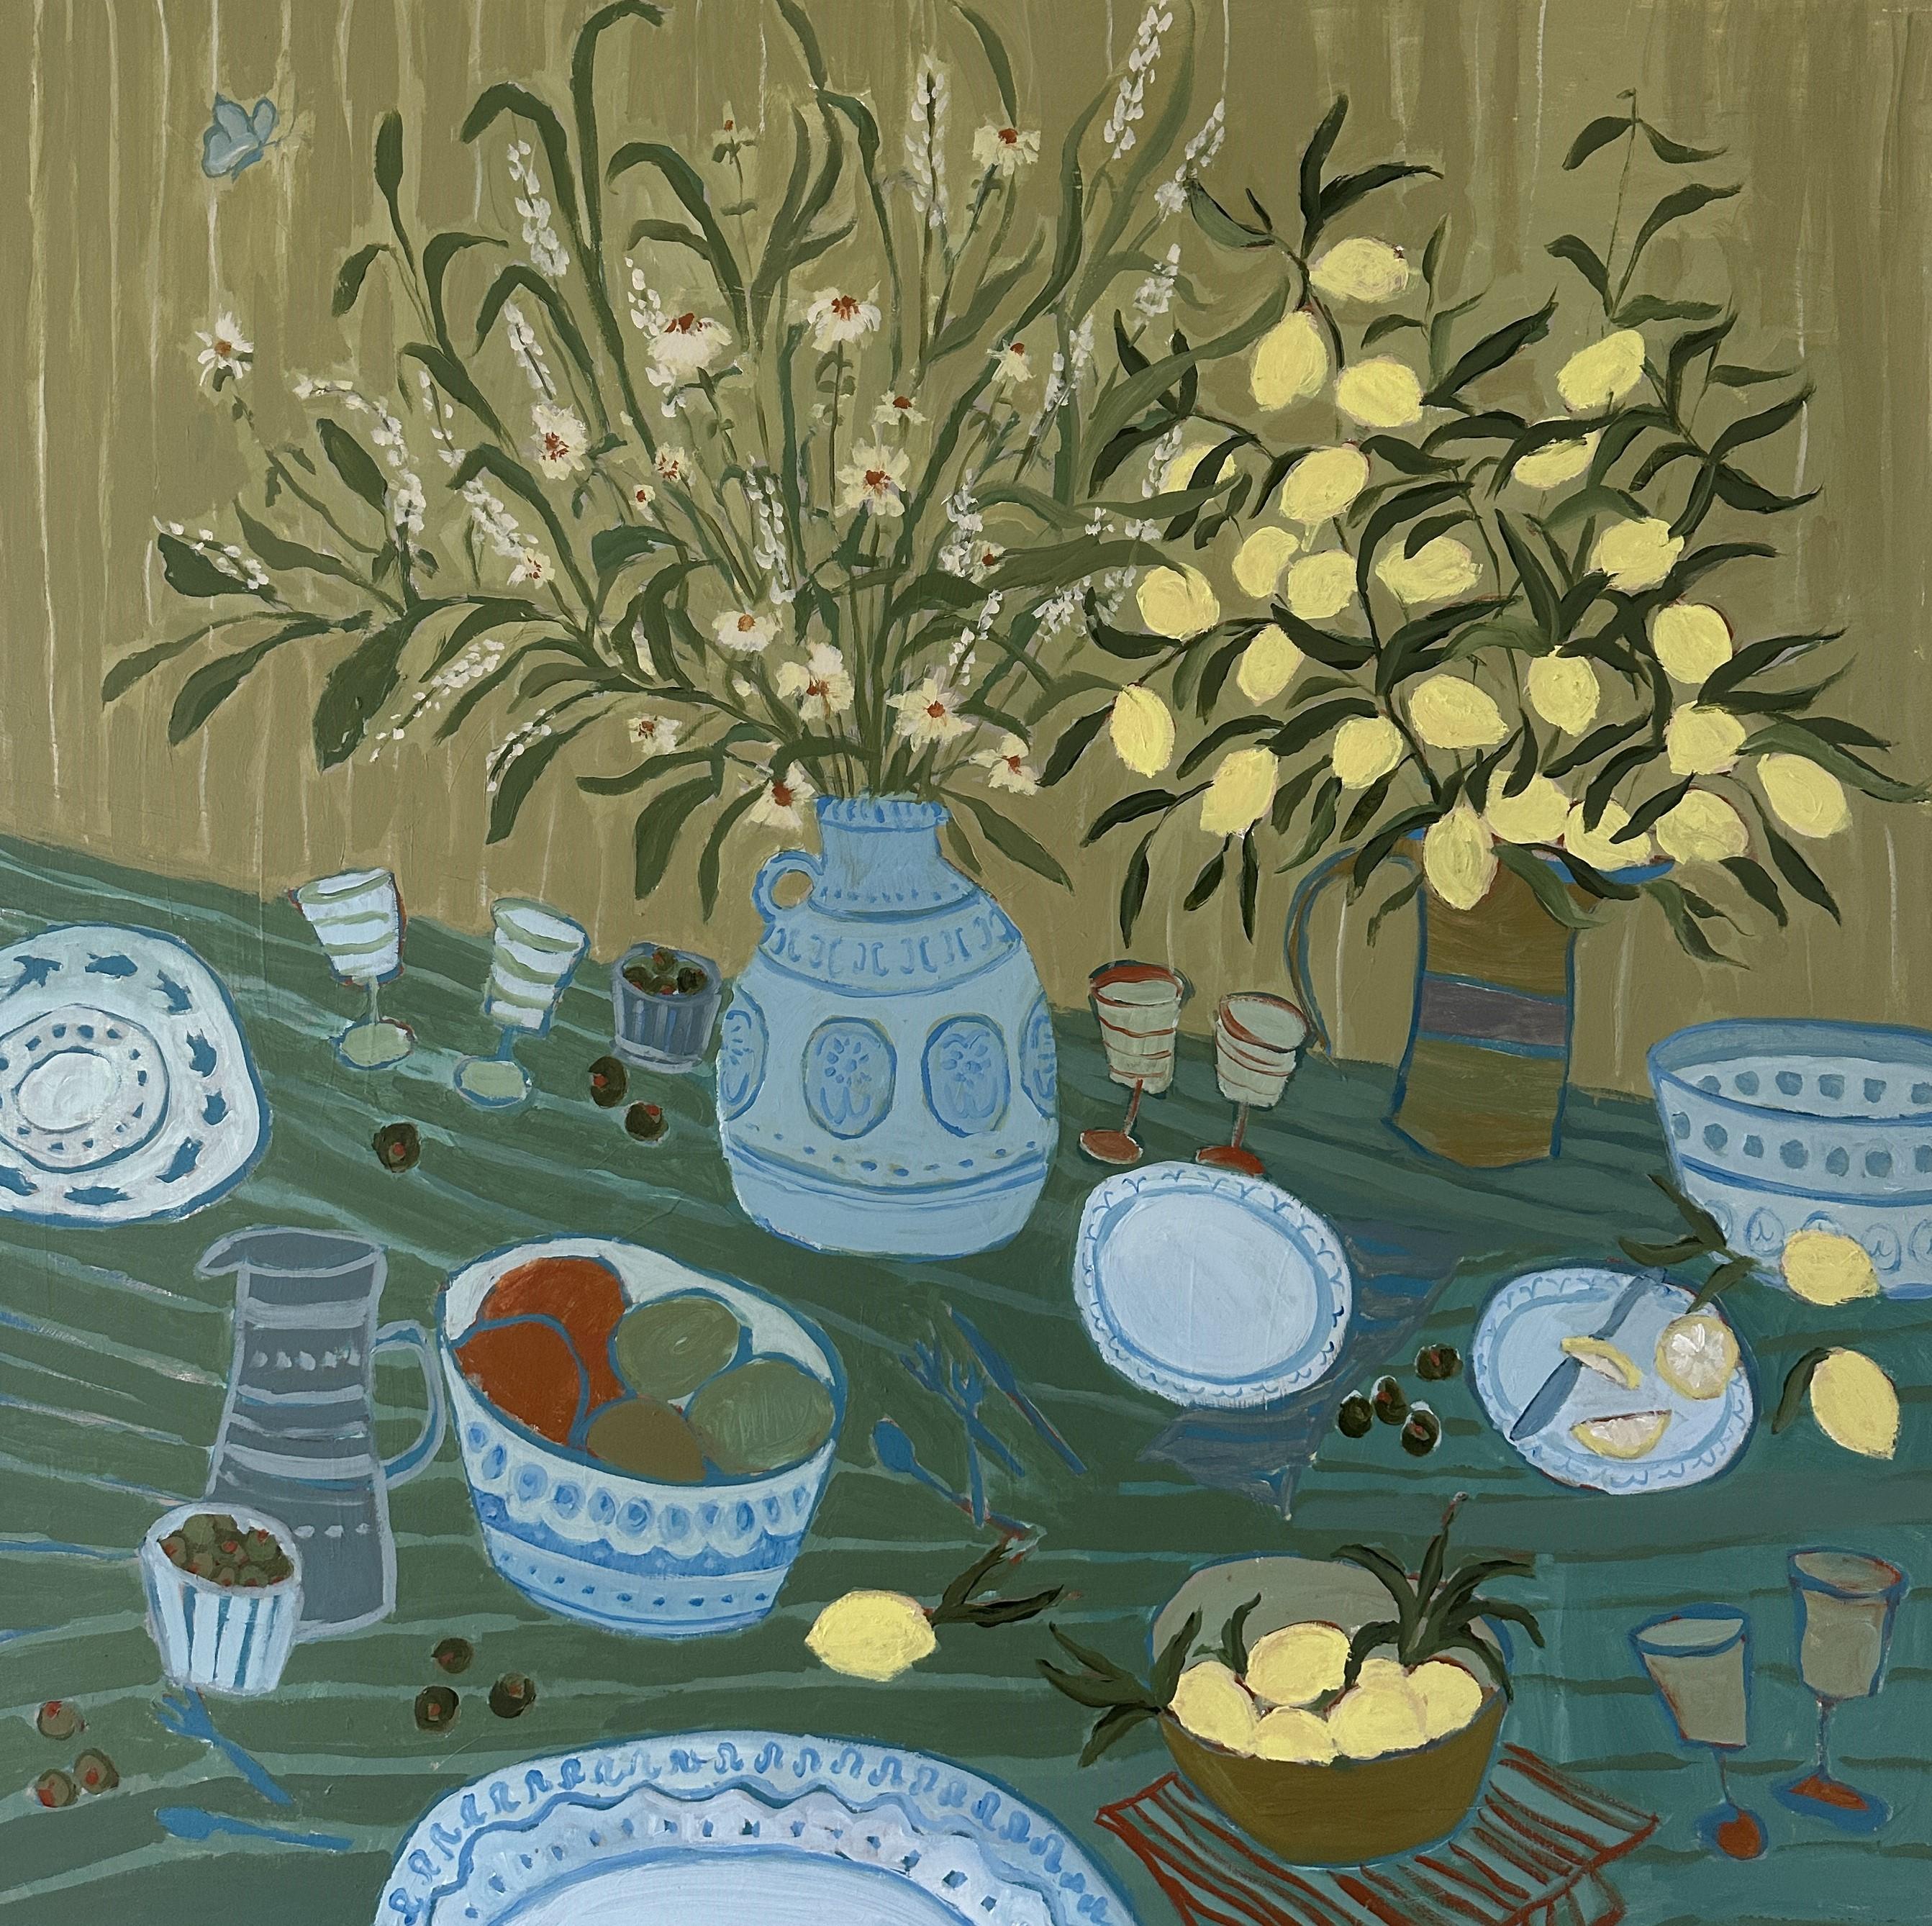 Limoncello by Laura McCarty, Large Square Framed Contemporary Still Life 